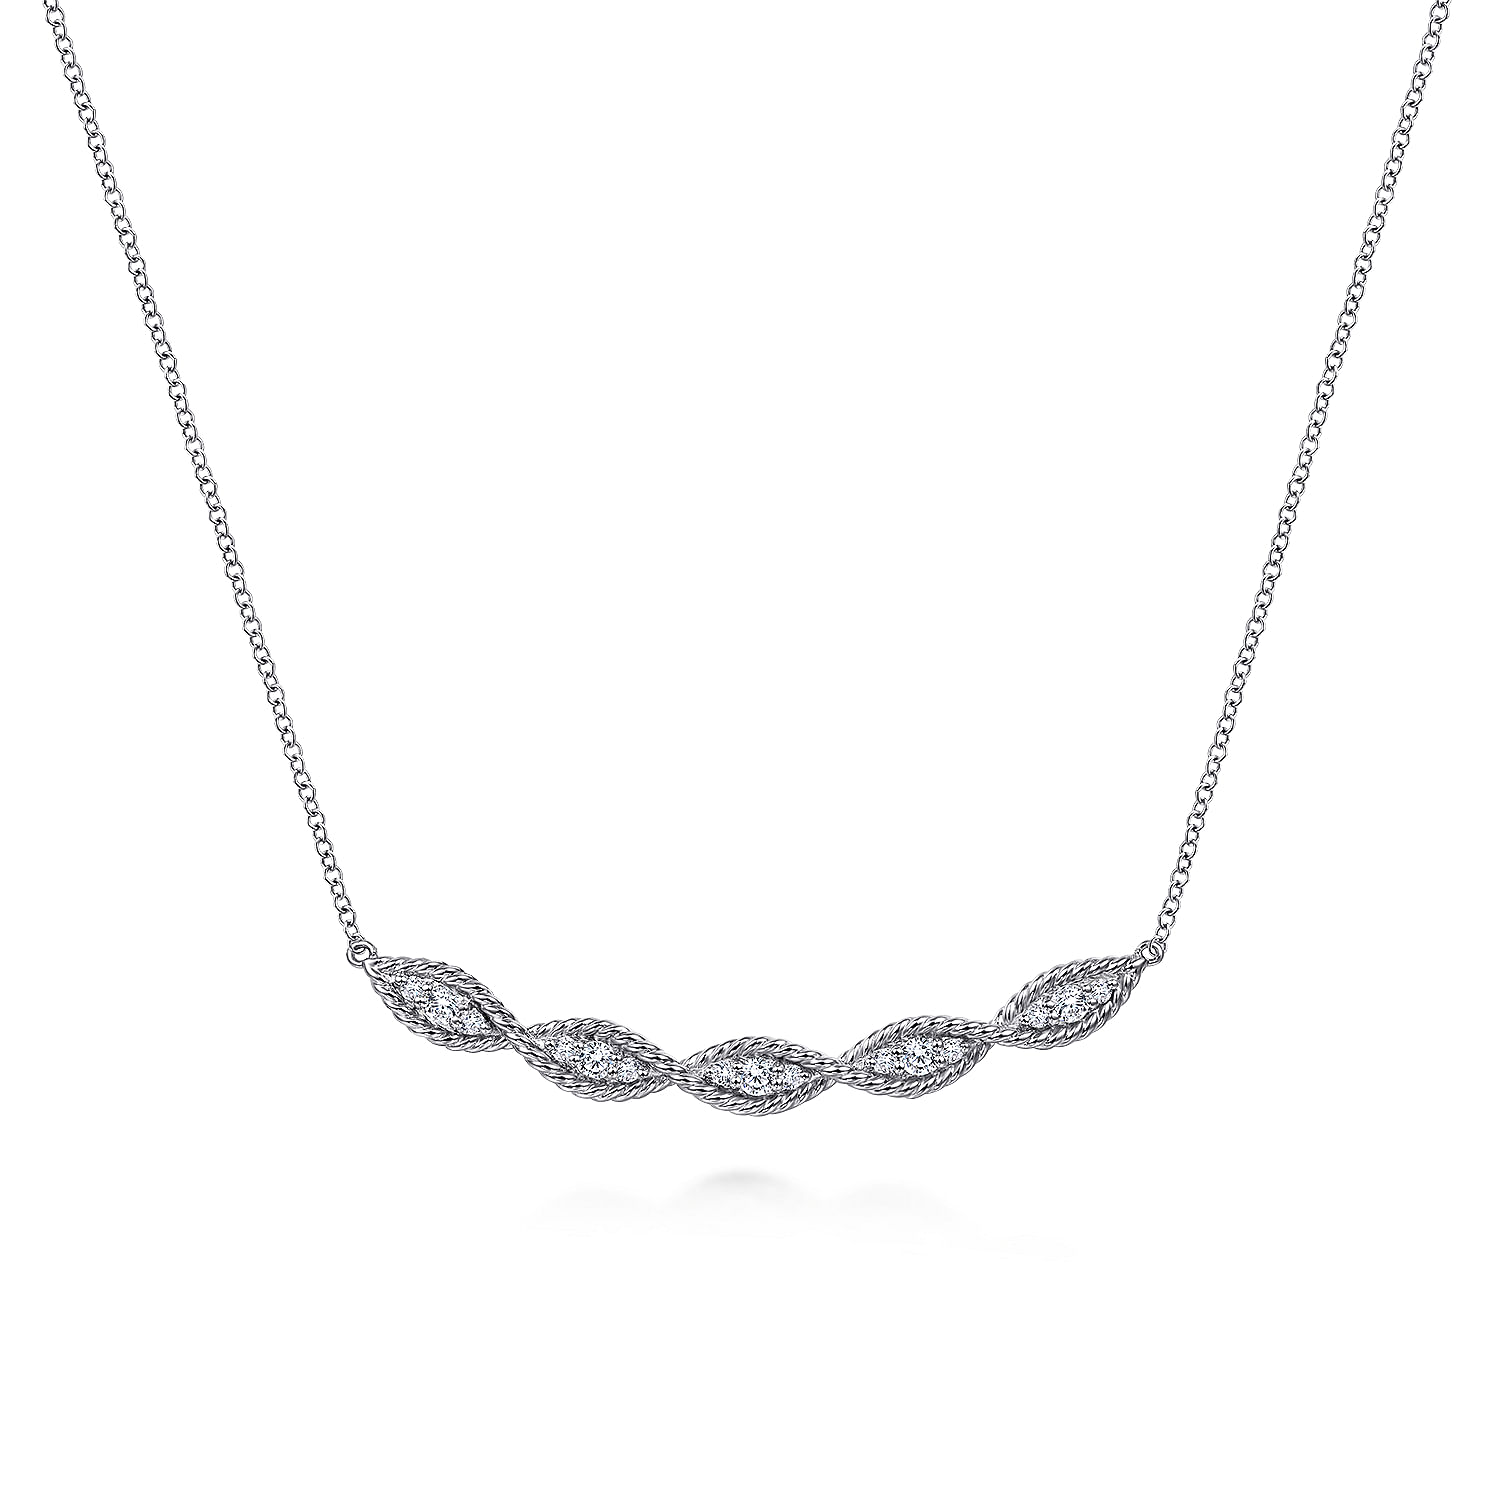 14K White Gold Twisted Rope Curved Diamond Bar Necklace